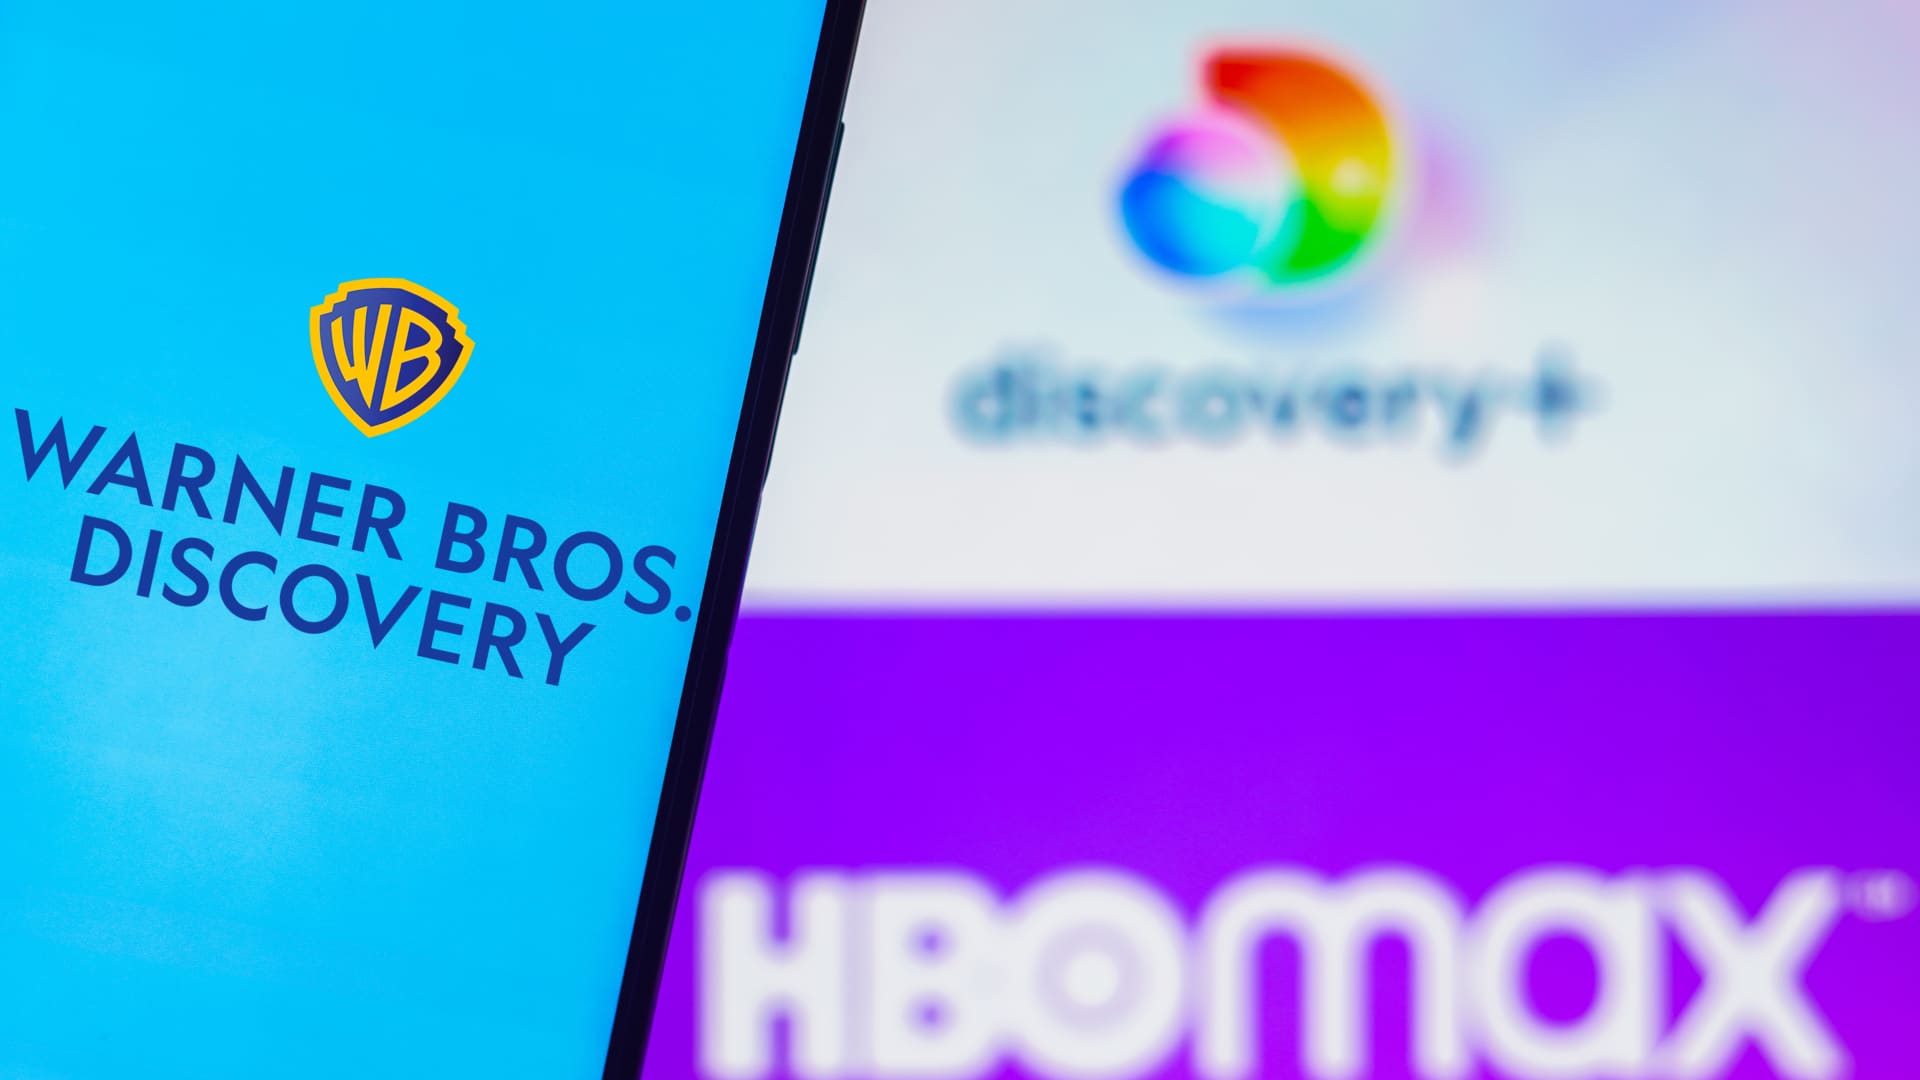 Get ready for an HBO Max – Discovery+ mashup app in 2023